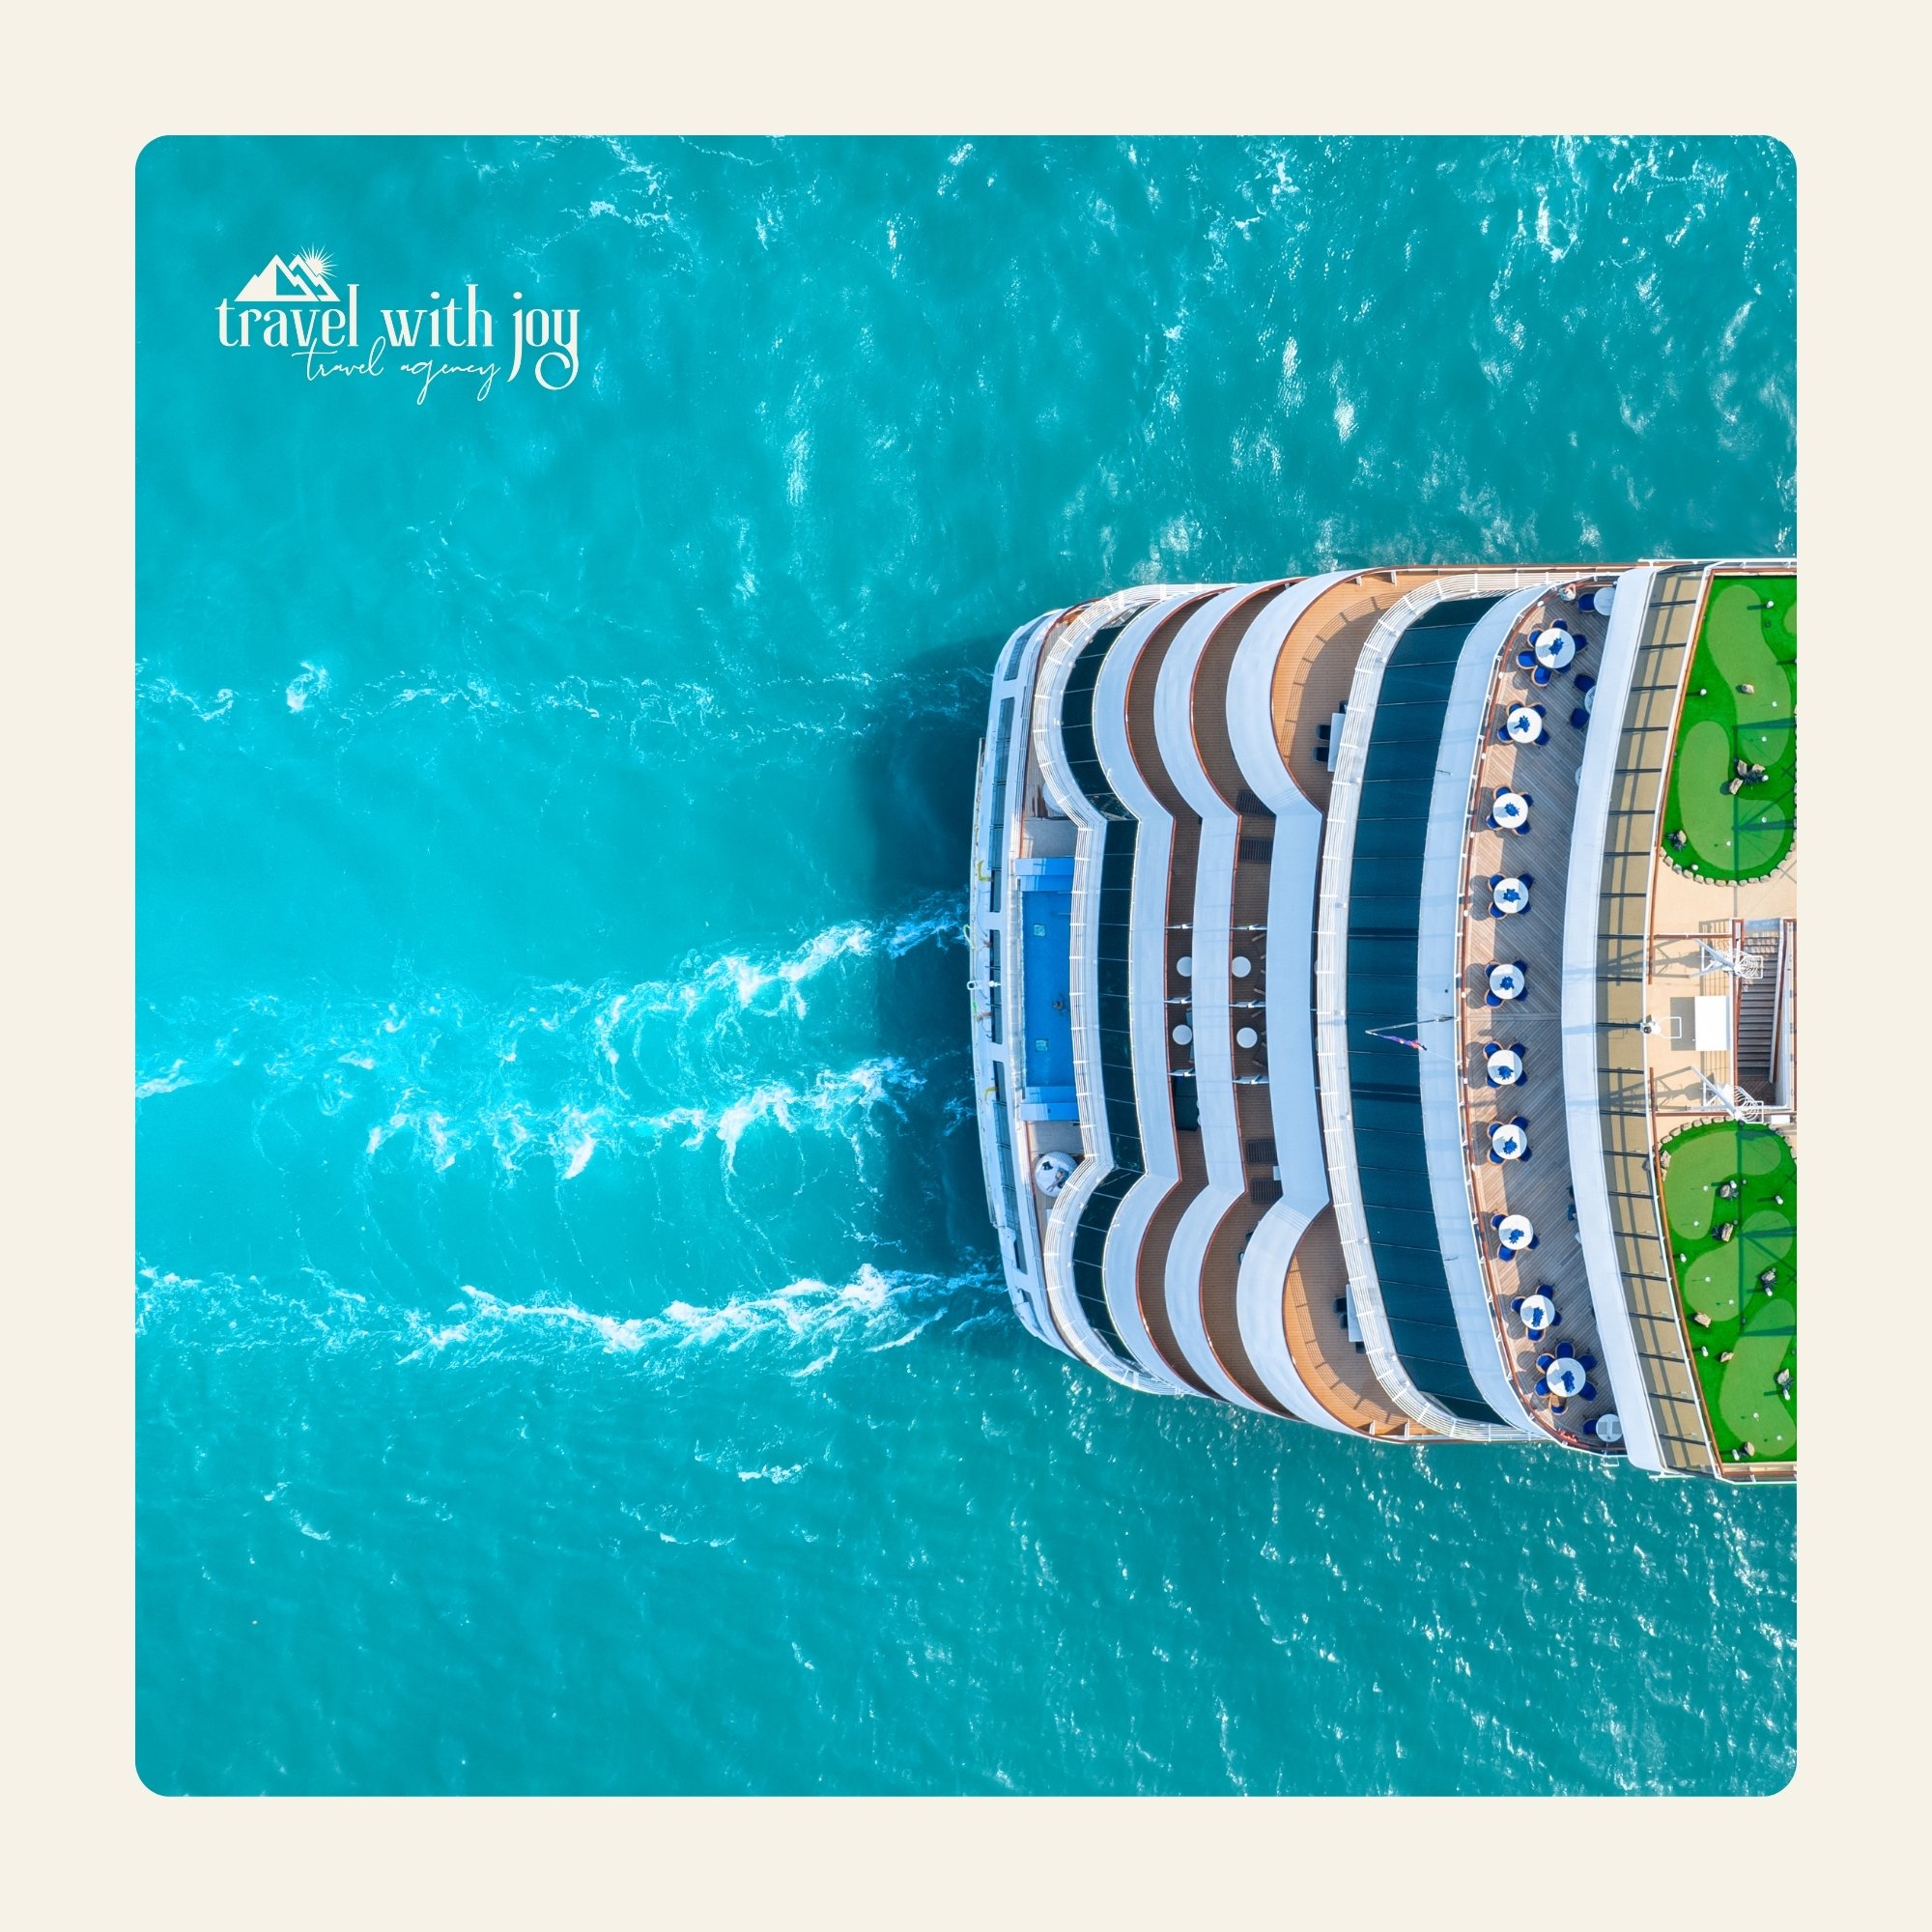 I Hope your weekend cruises by as slow as the slowest cruise ship and it feels like it lasted a week instead of a day.

#weekendmood  #weekendgetaway #WeekendIndulgence #weekendvibes❤️ #weekendvibe #cruise2024 #cruiseship #cruisetime #cruisevacation 